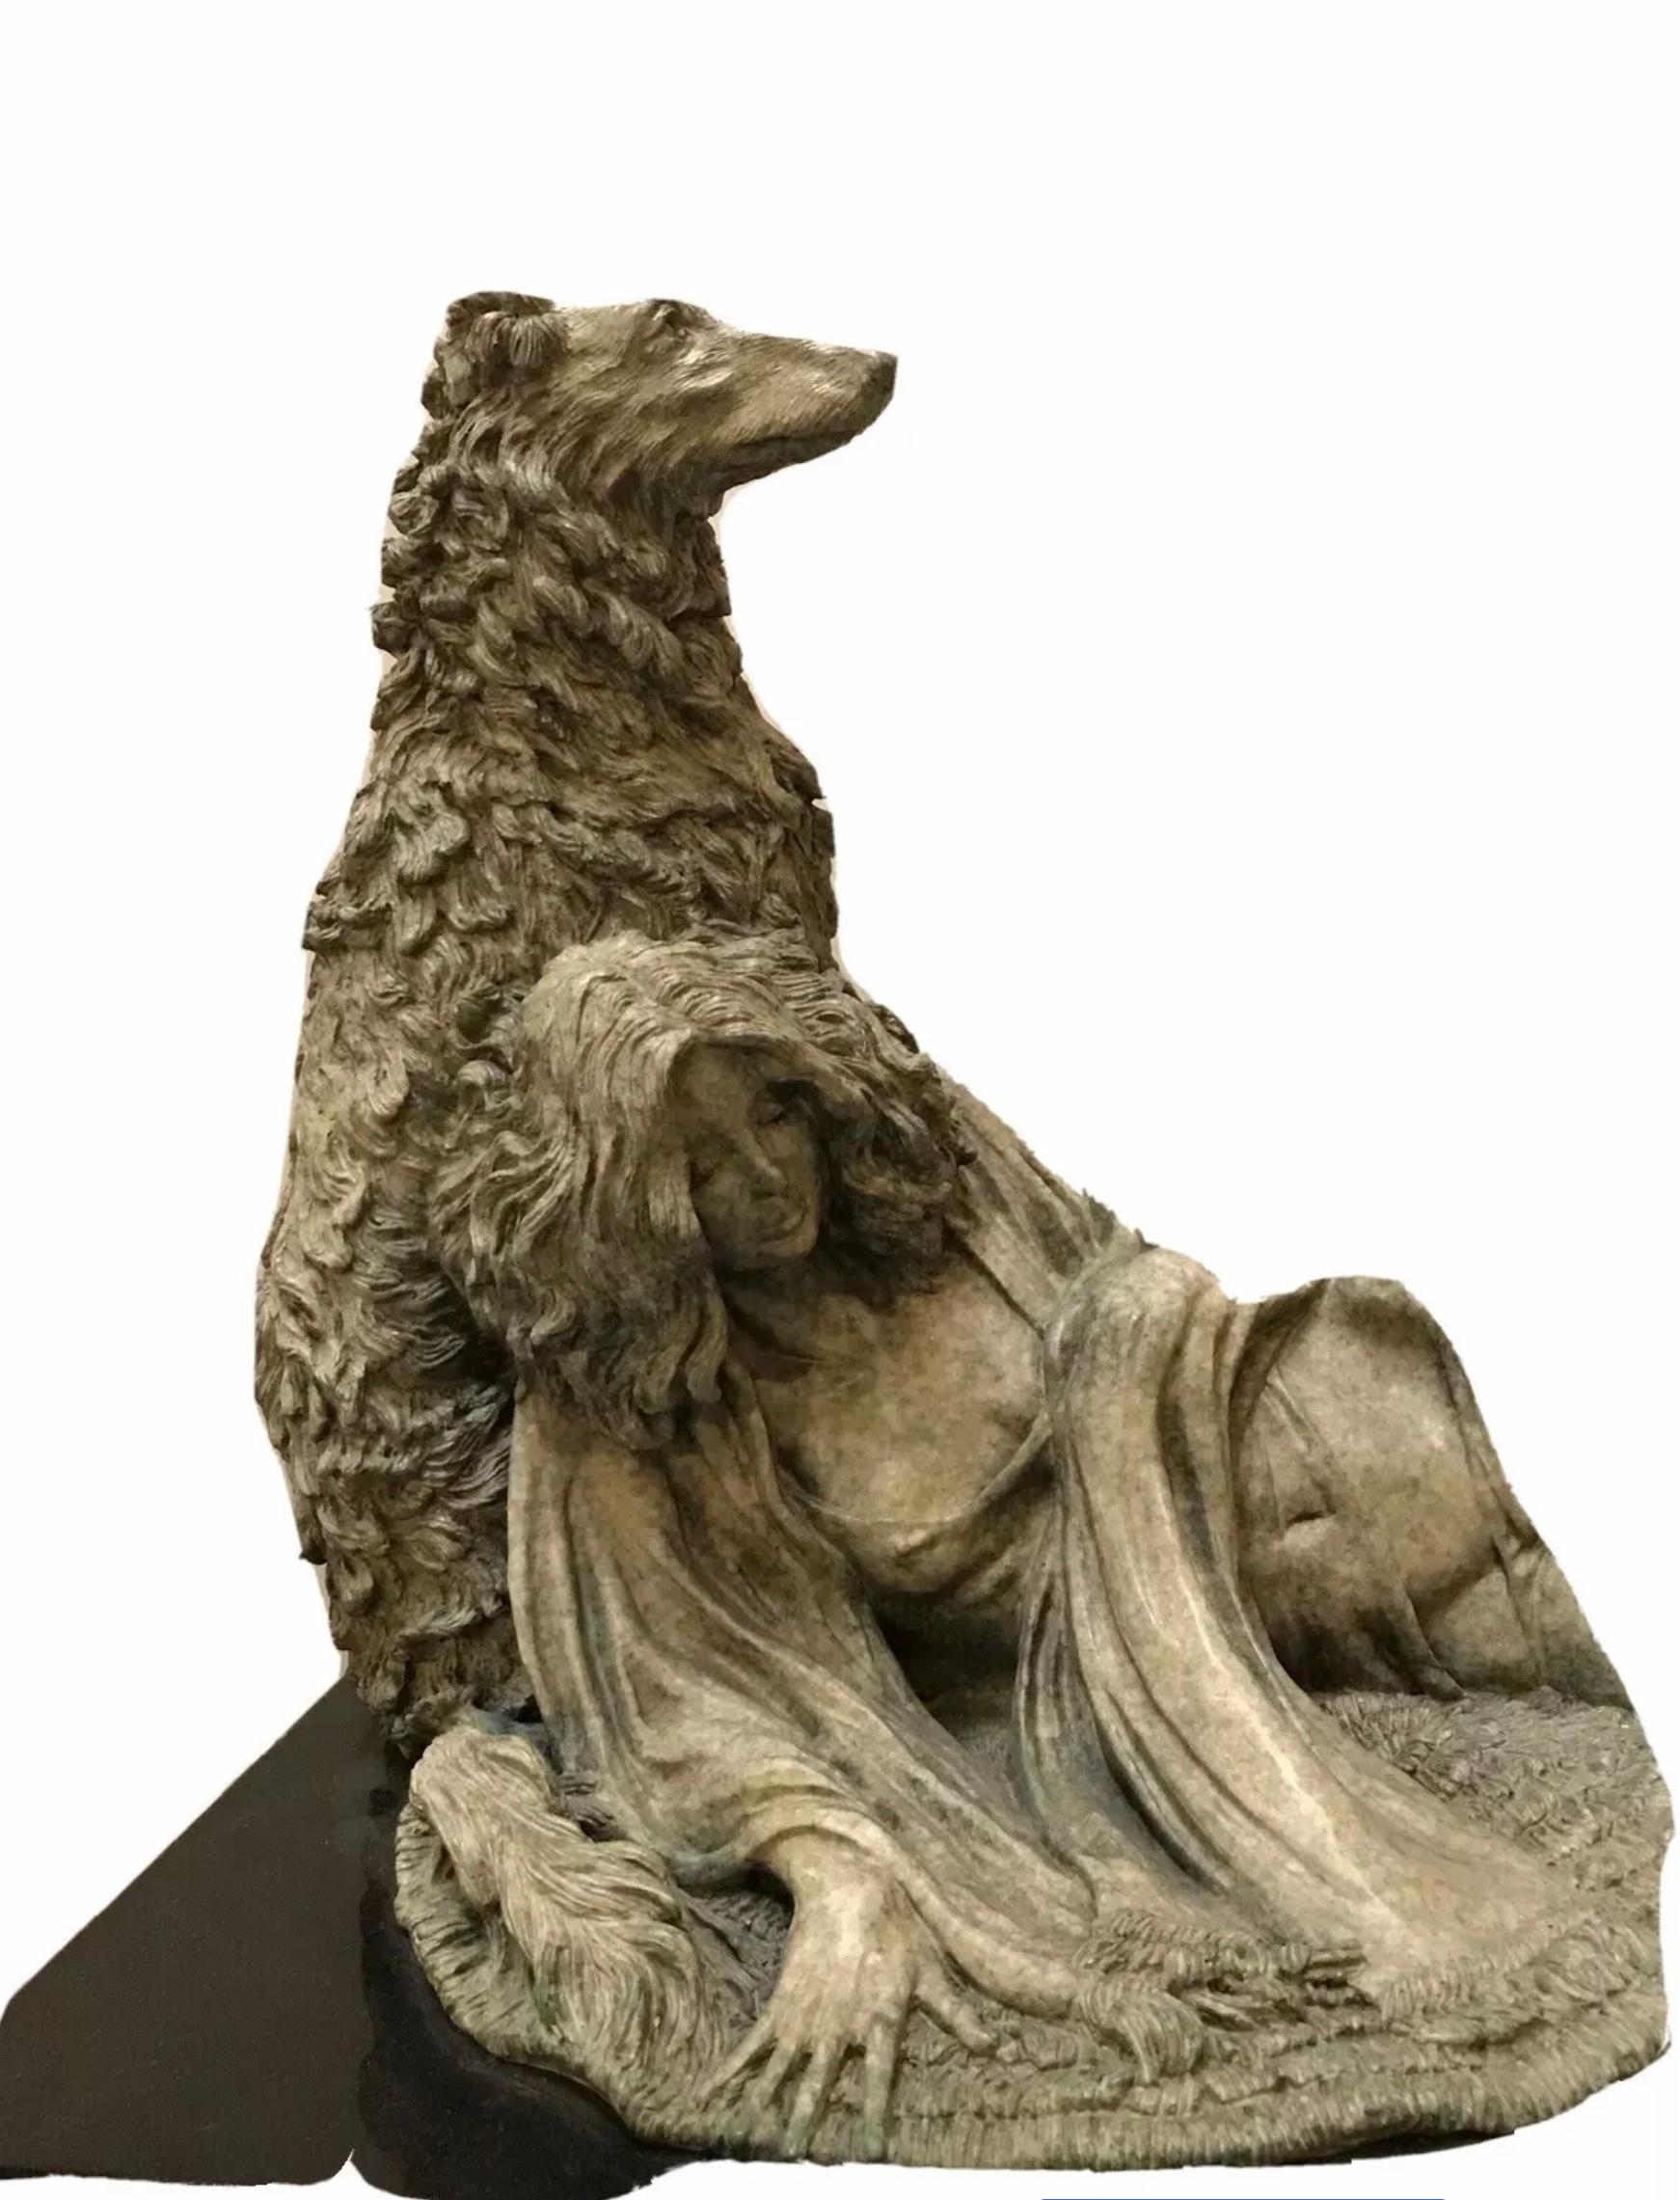 LADY AND SCOTTISH DOG - Sculpture by Allen Ralph Messey 